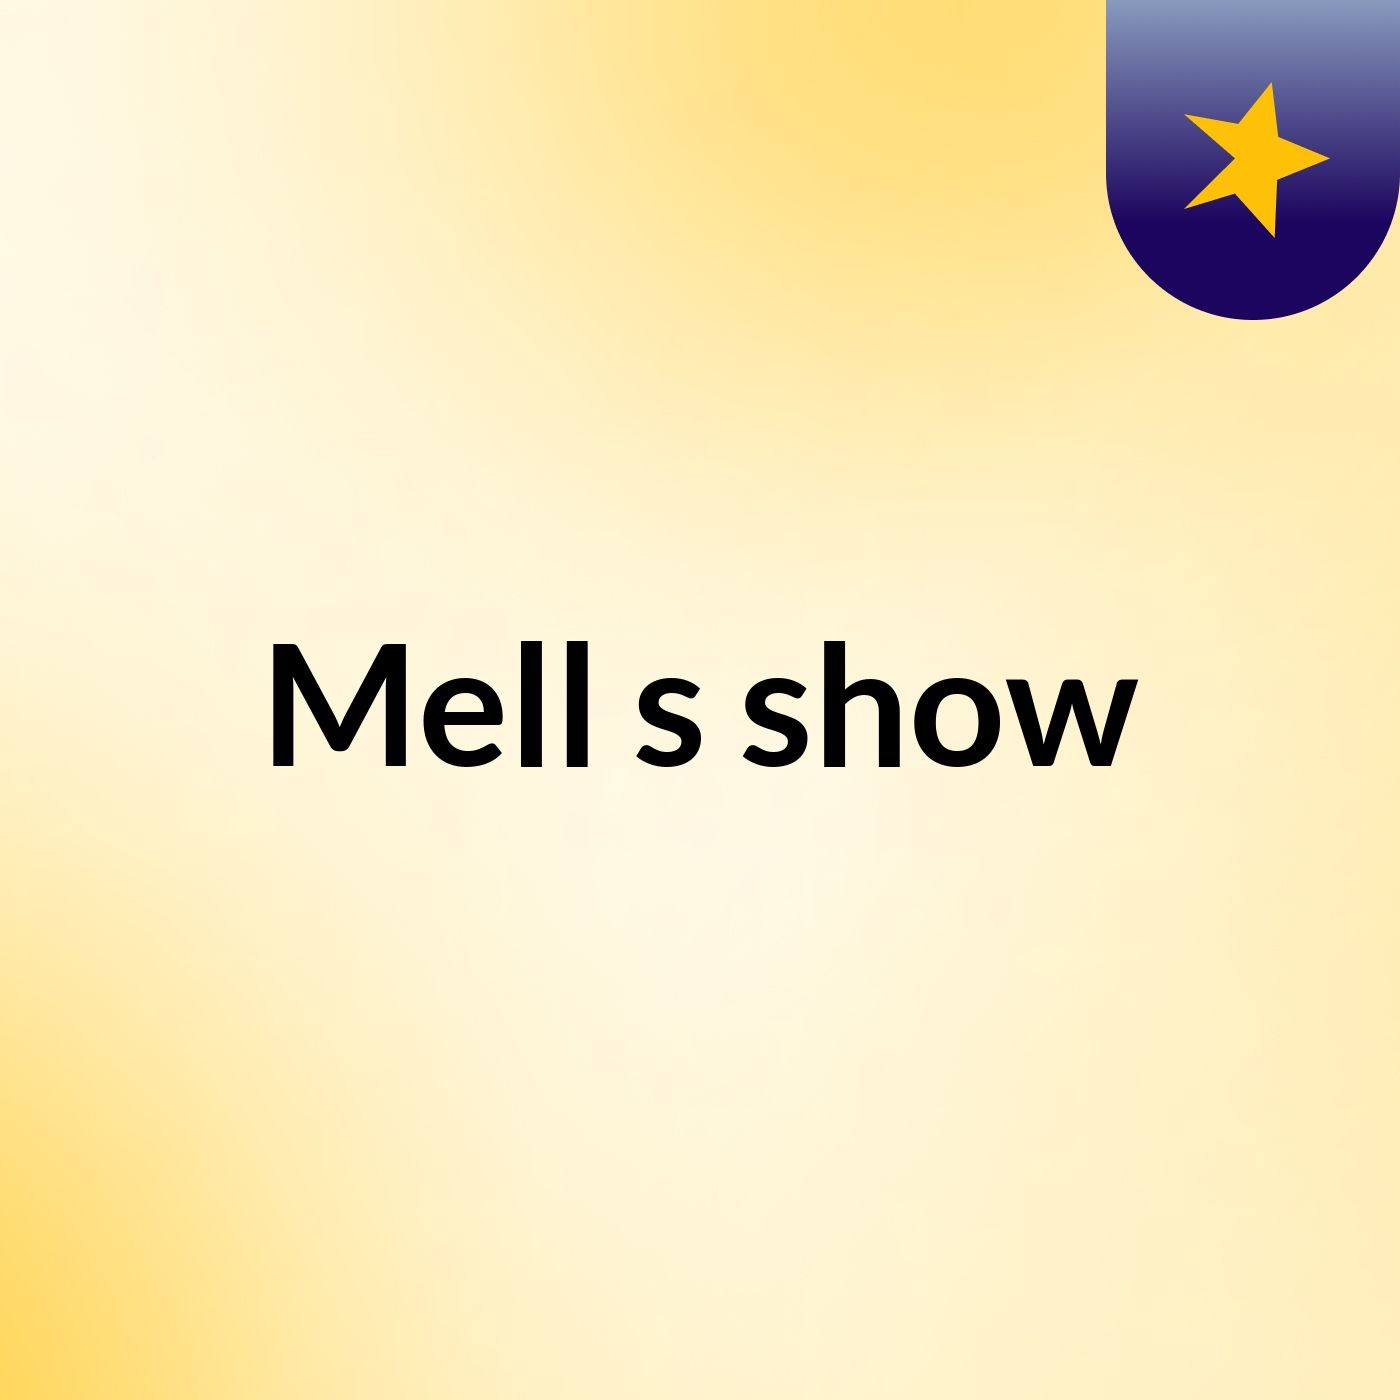 Mell's show